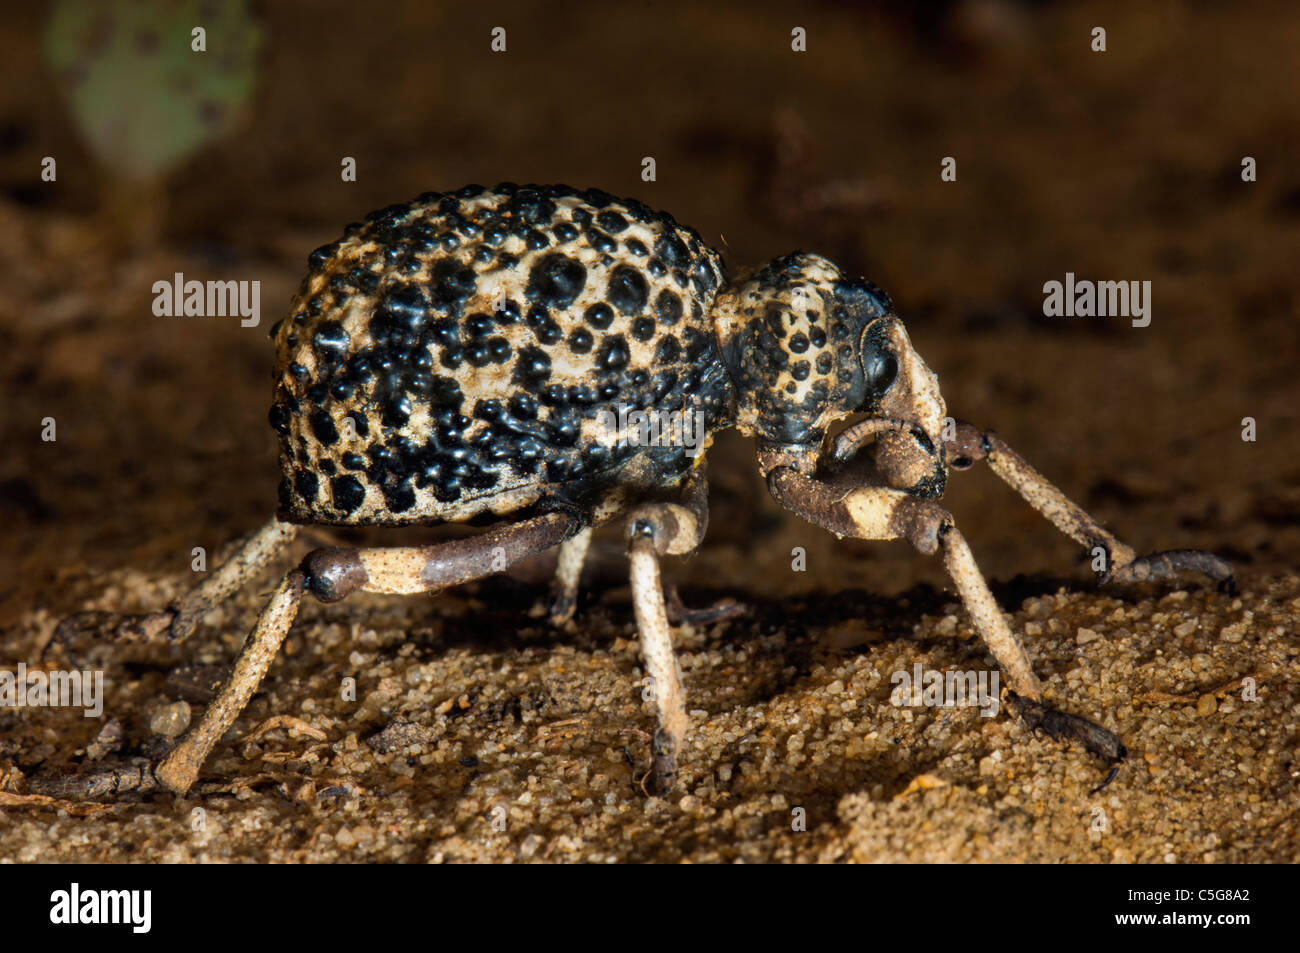 wart warty Weevil of madagascar big 2 inch insect Curculionoidea on ground animal africa brown brownly huge giant found at Nosy Stock Photo